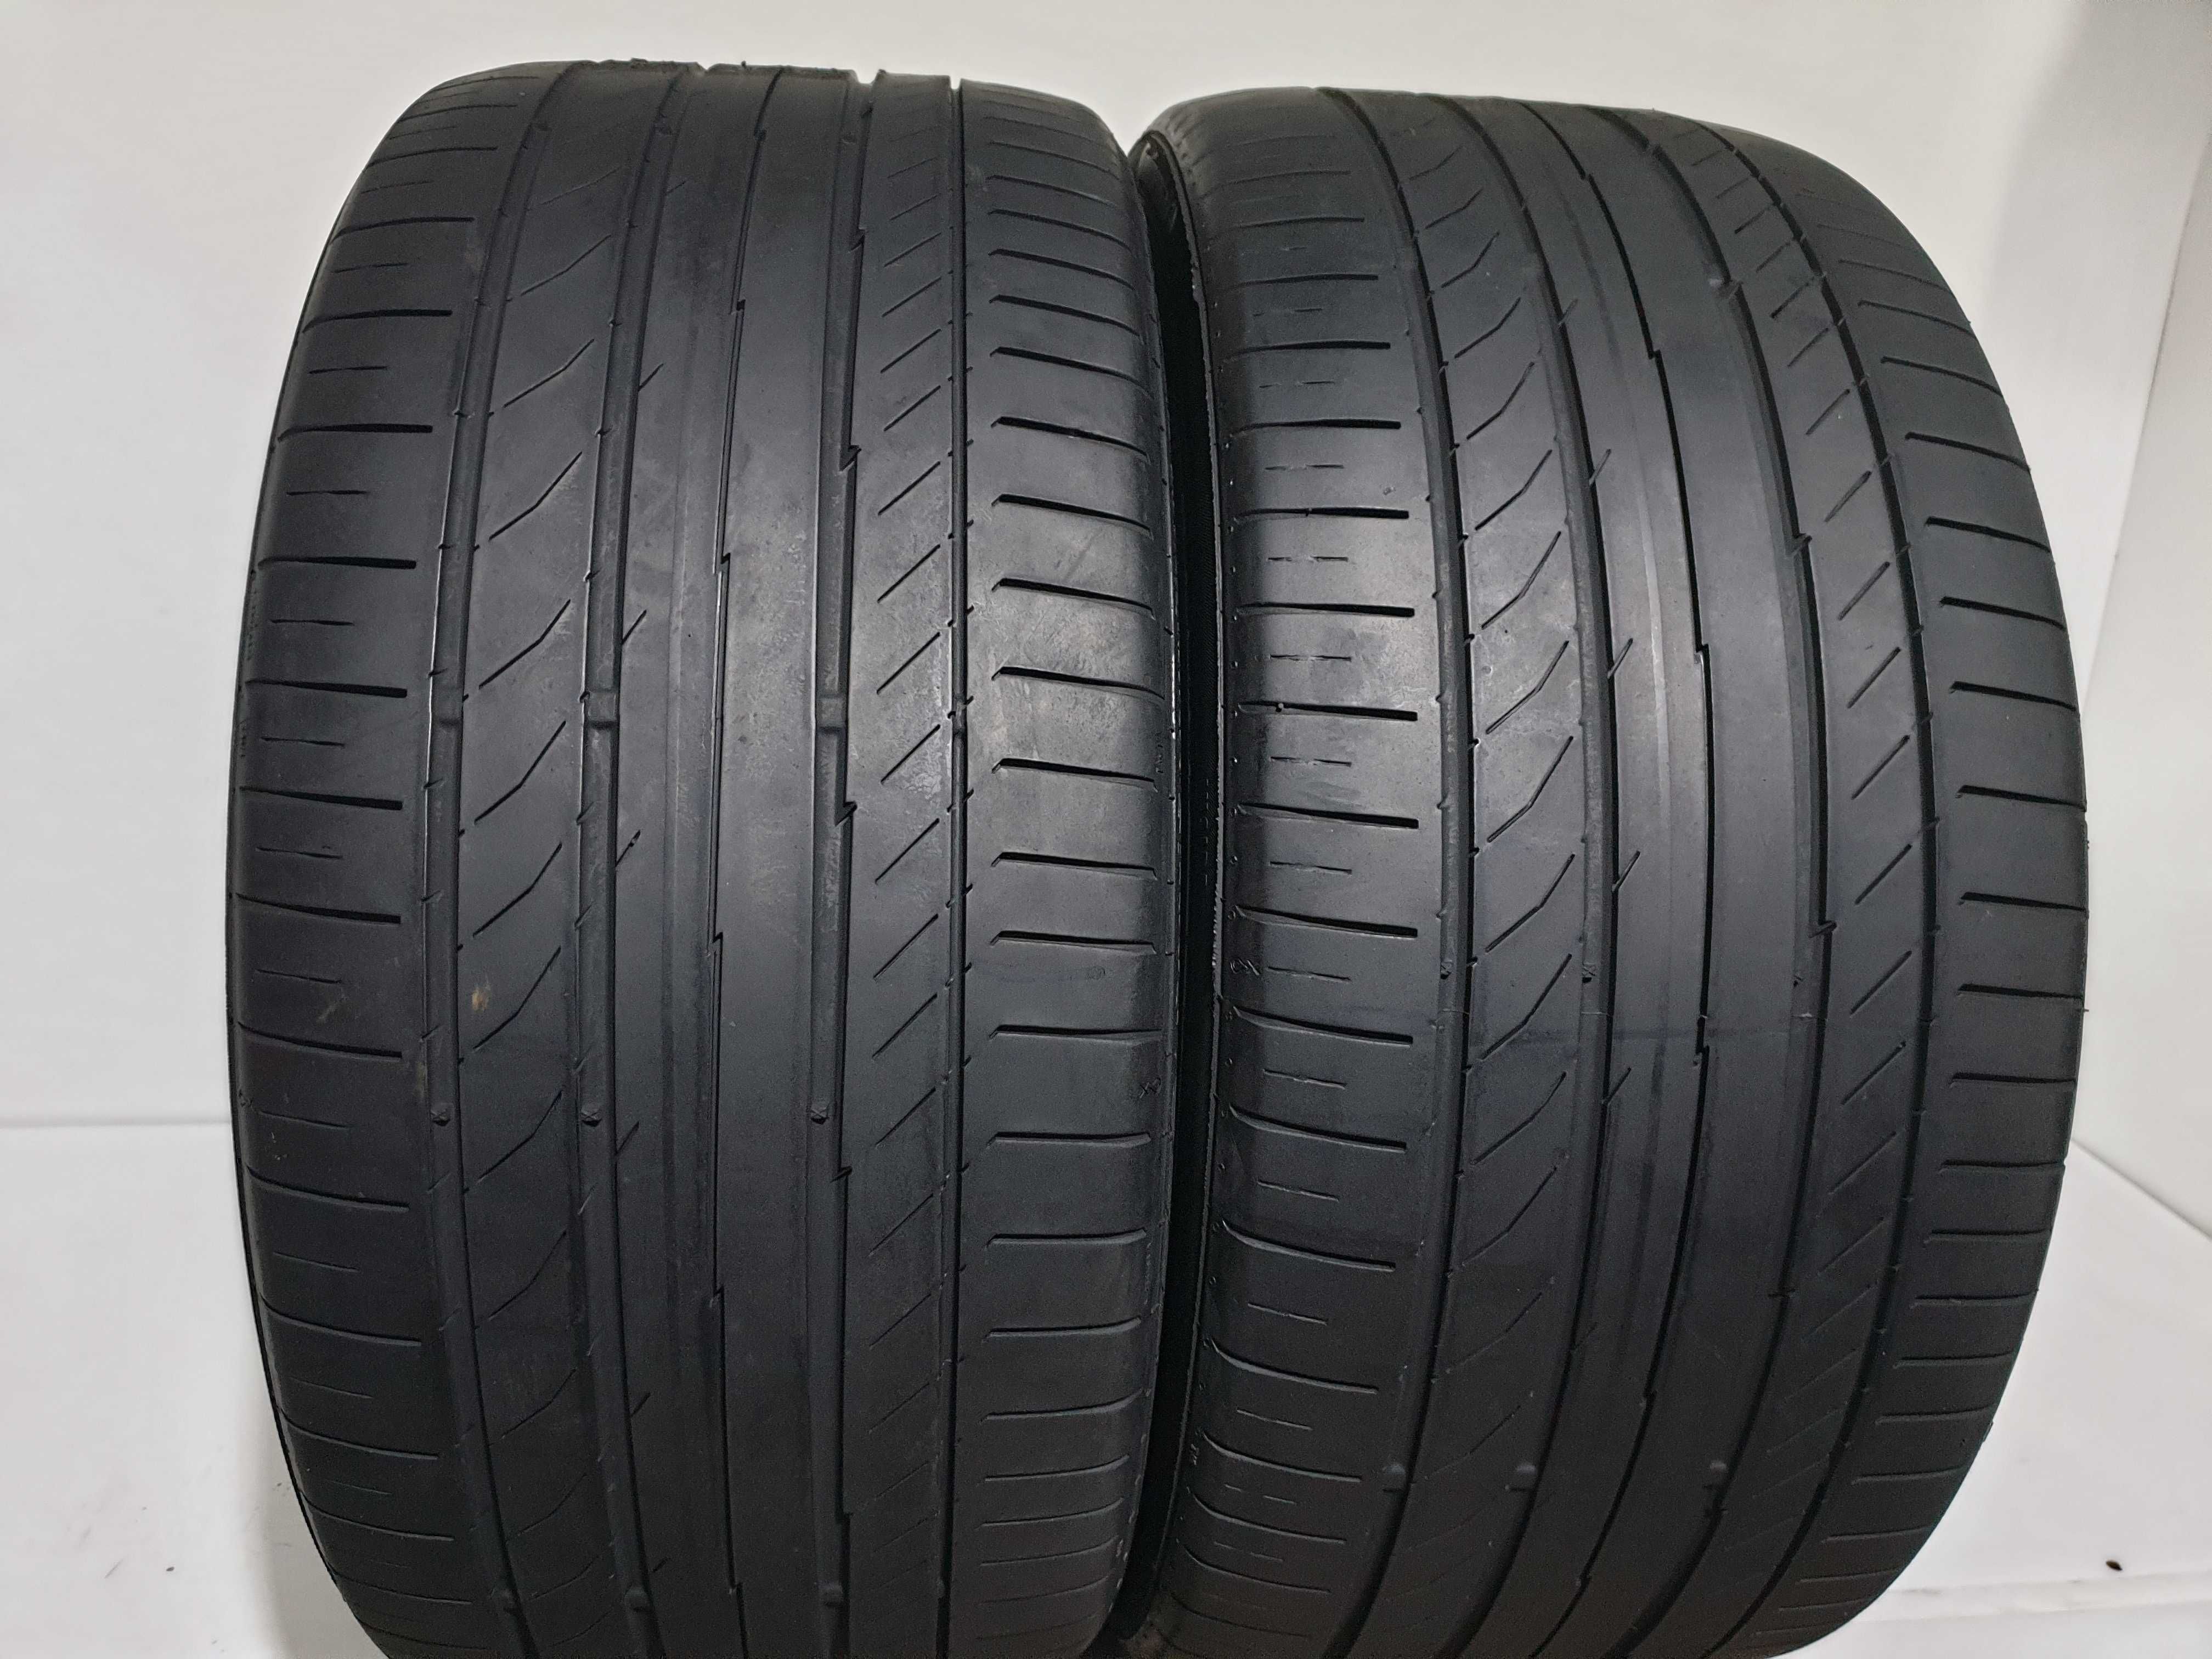 Anvelope Second Hand Continental Vara-255/35 R19 92Y,in stoc R17/18/20